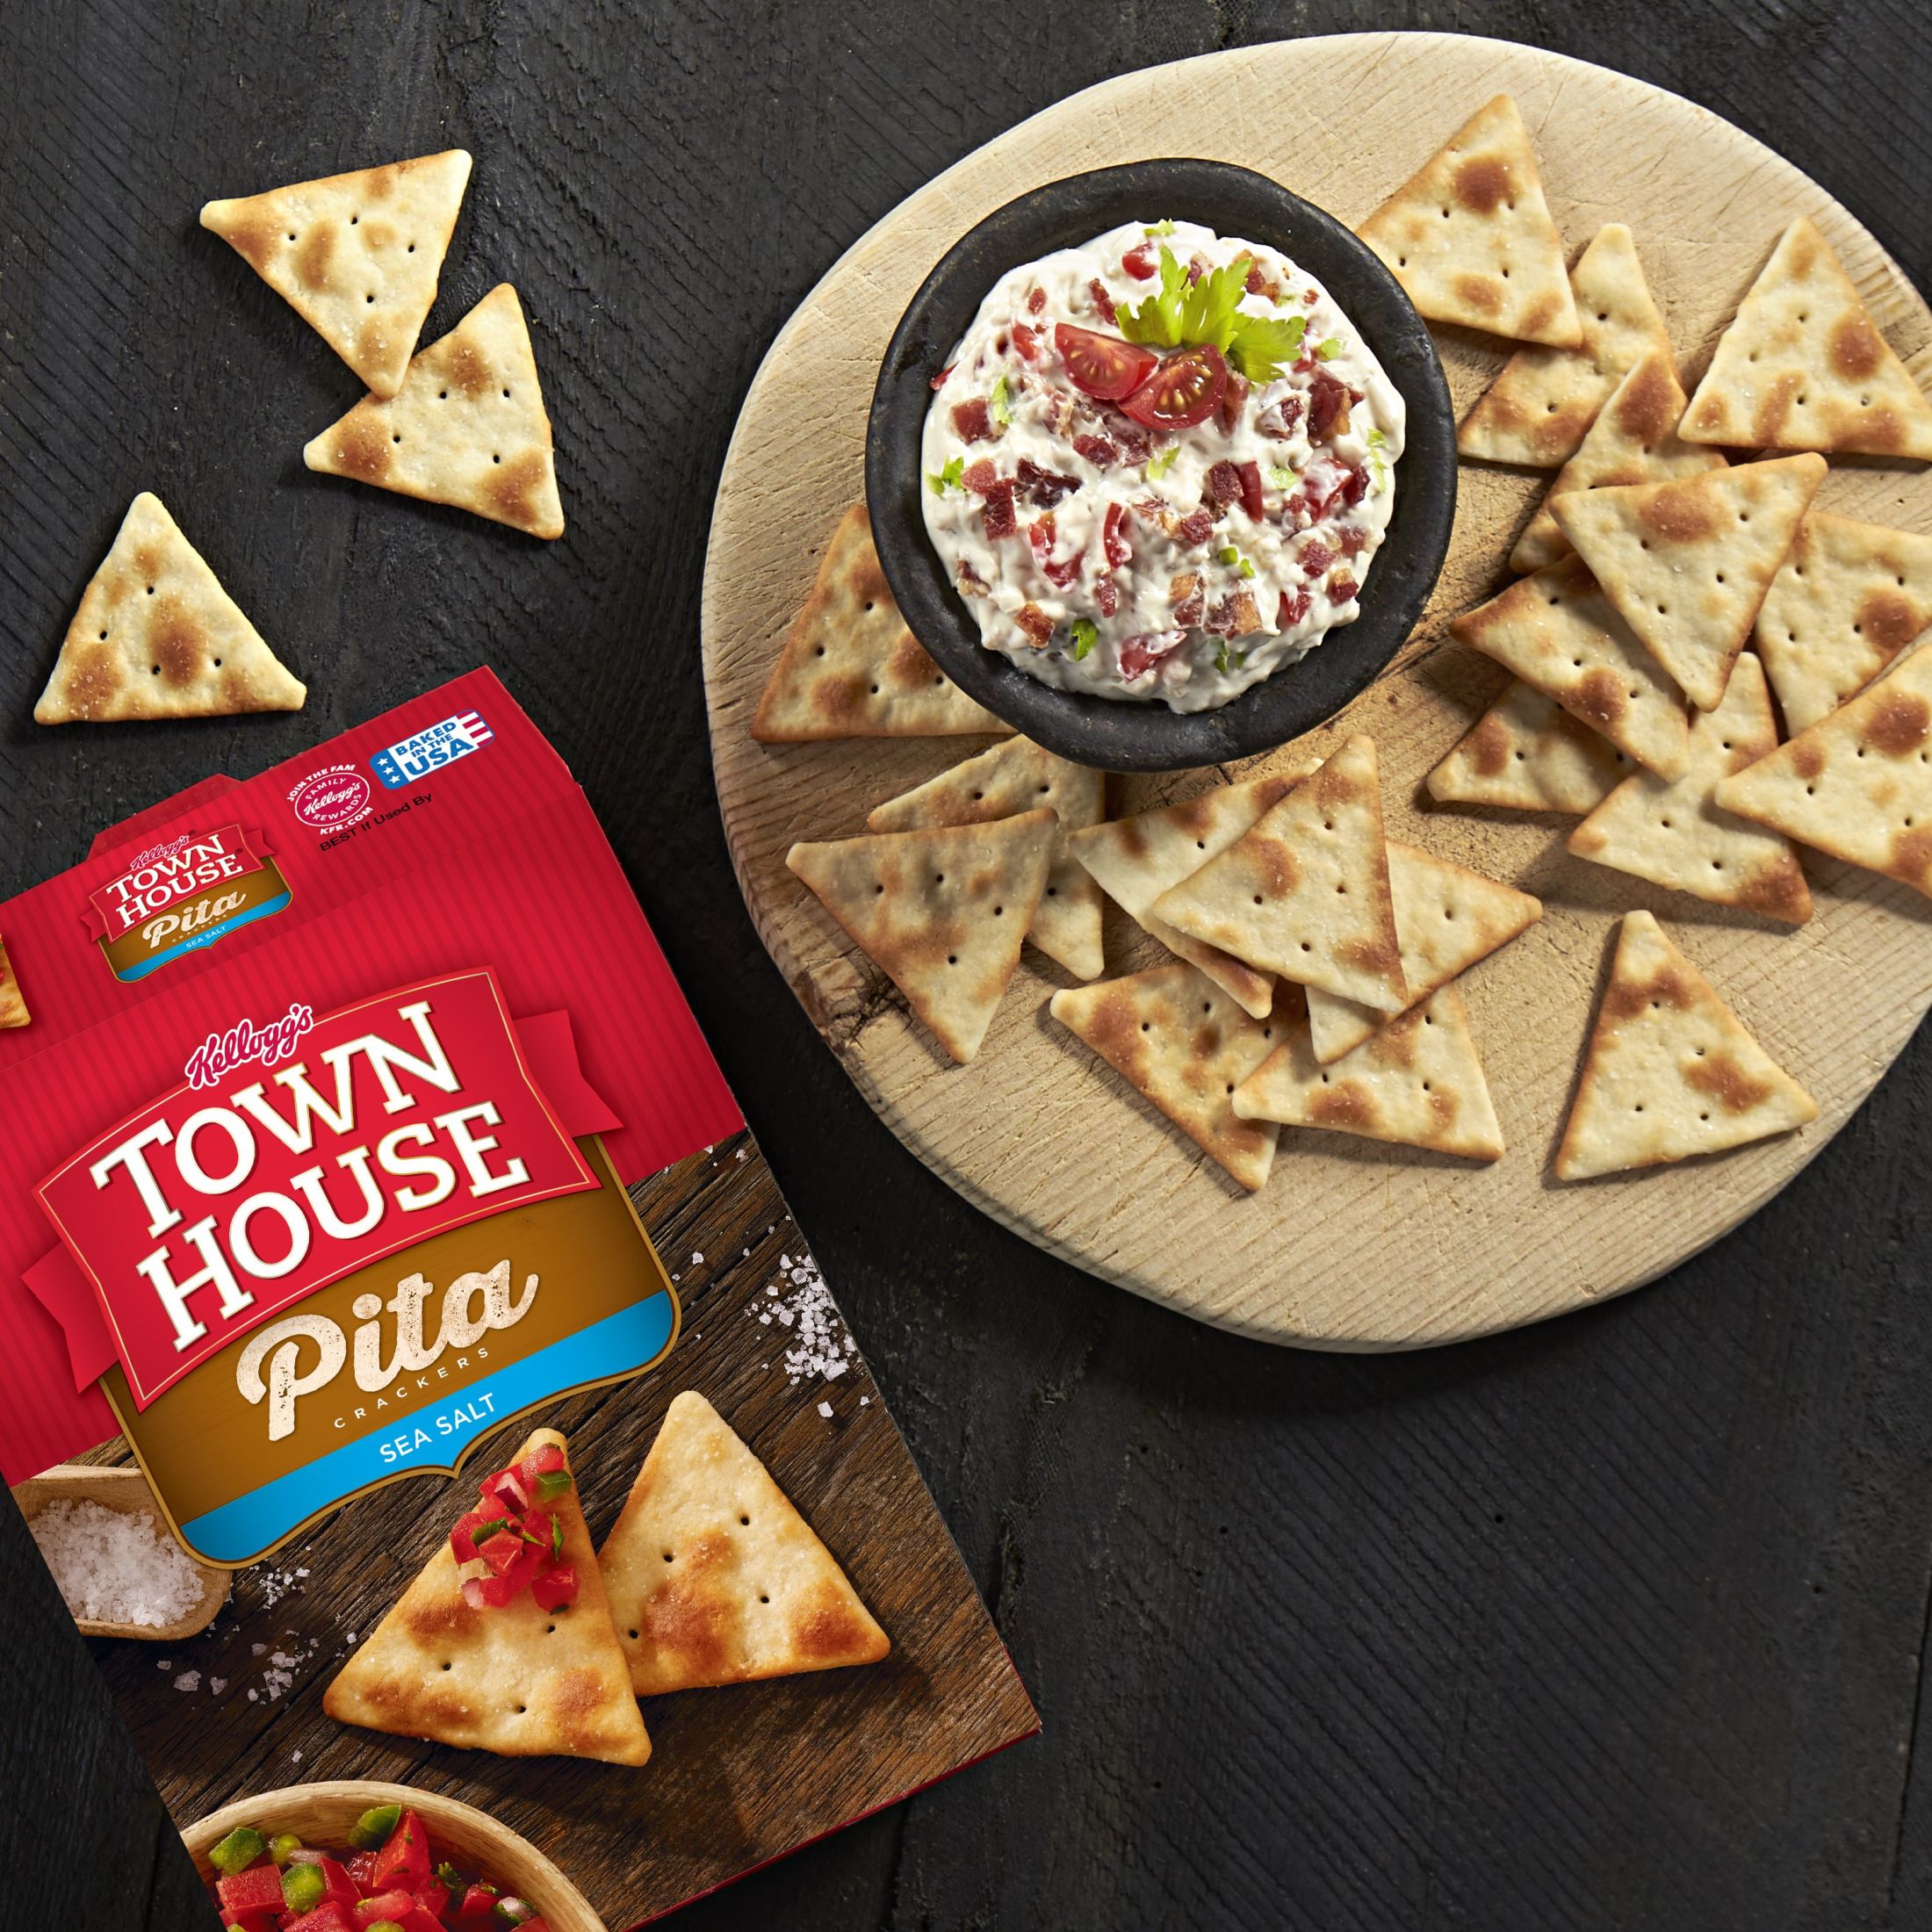 Town House Pita Sea Salt Oven Baked Crackers, 9.5 oz - image 4 of 10